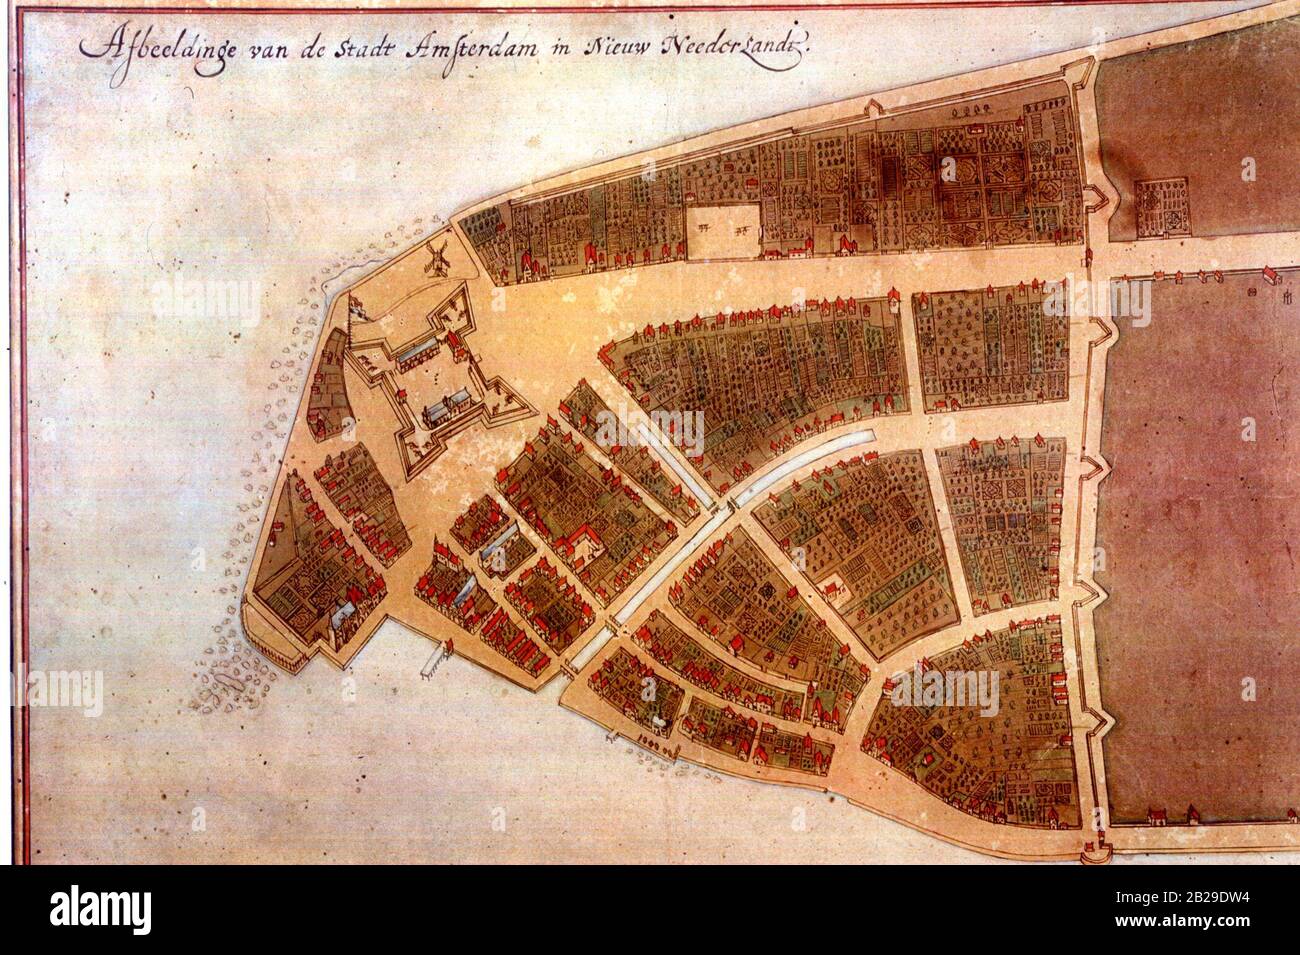 The Castello plan is the earliest known plan of Amsterdam (so not New Amsterdam, as you can see on the picture), and the only one dating from the Dutch period. The text at the top of the image states: 'Image of the city Amsterdam in New Netherland', circa 1660 Stock Photo